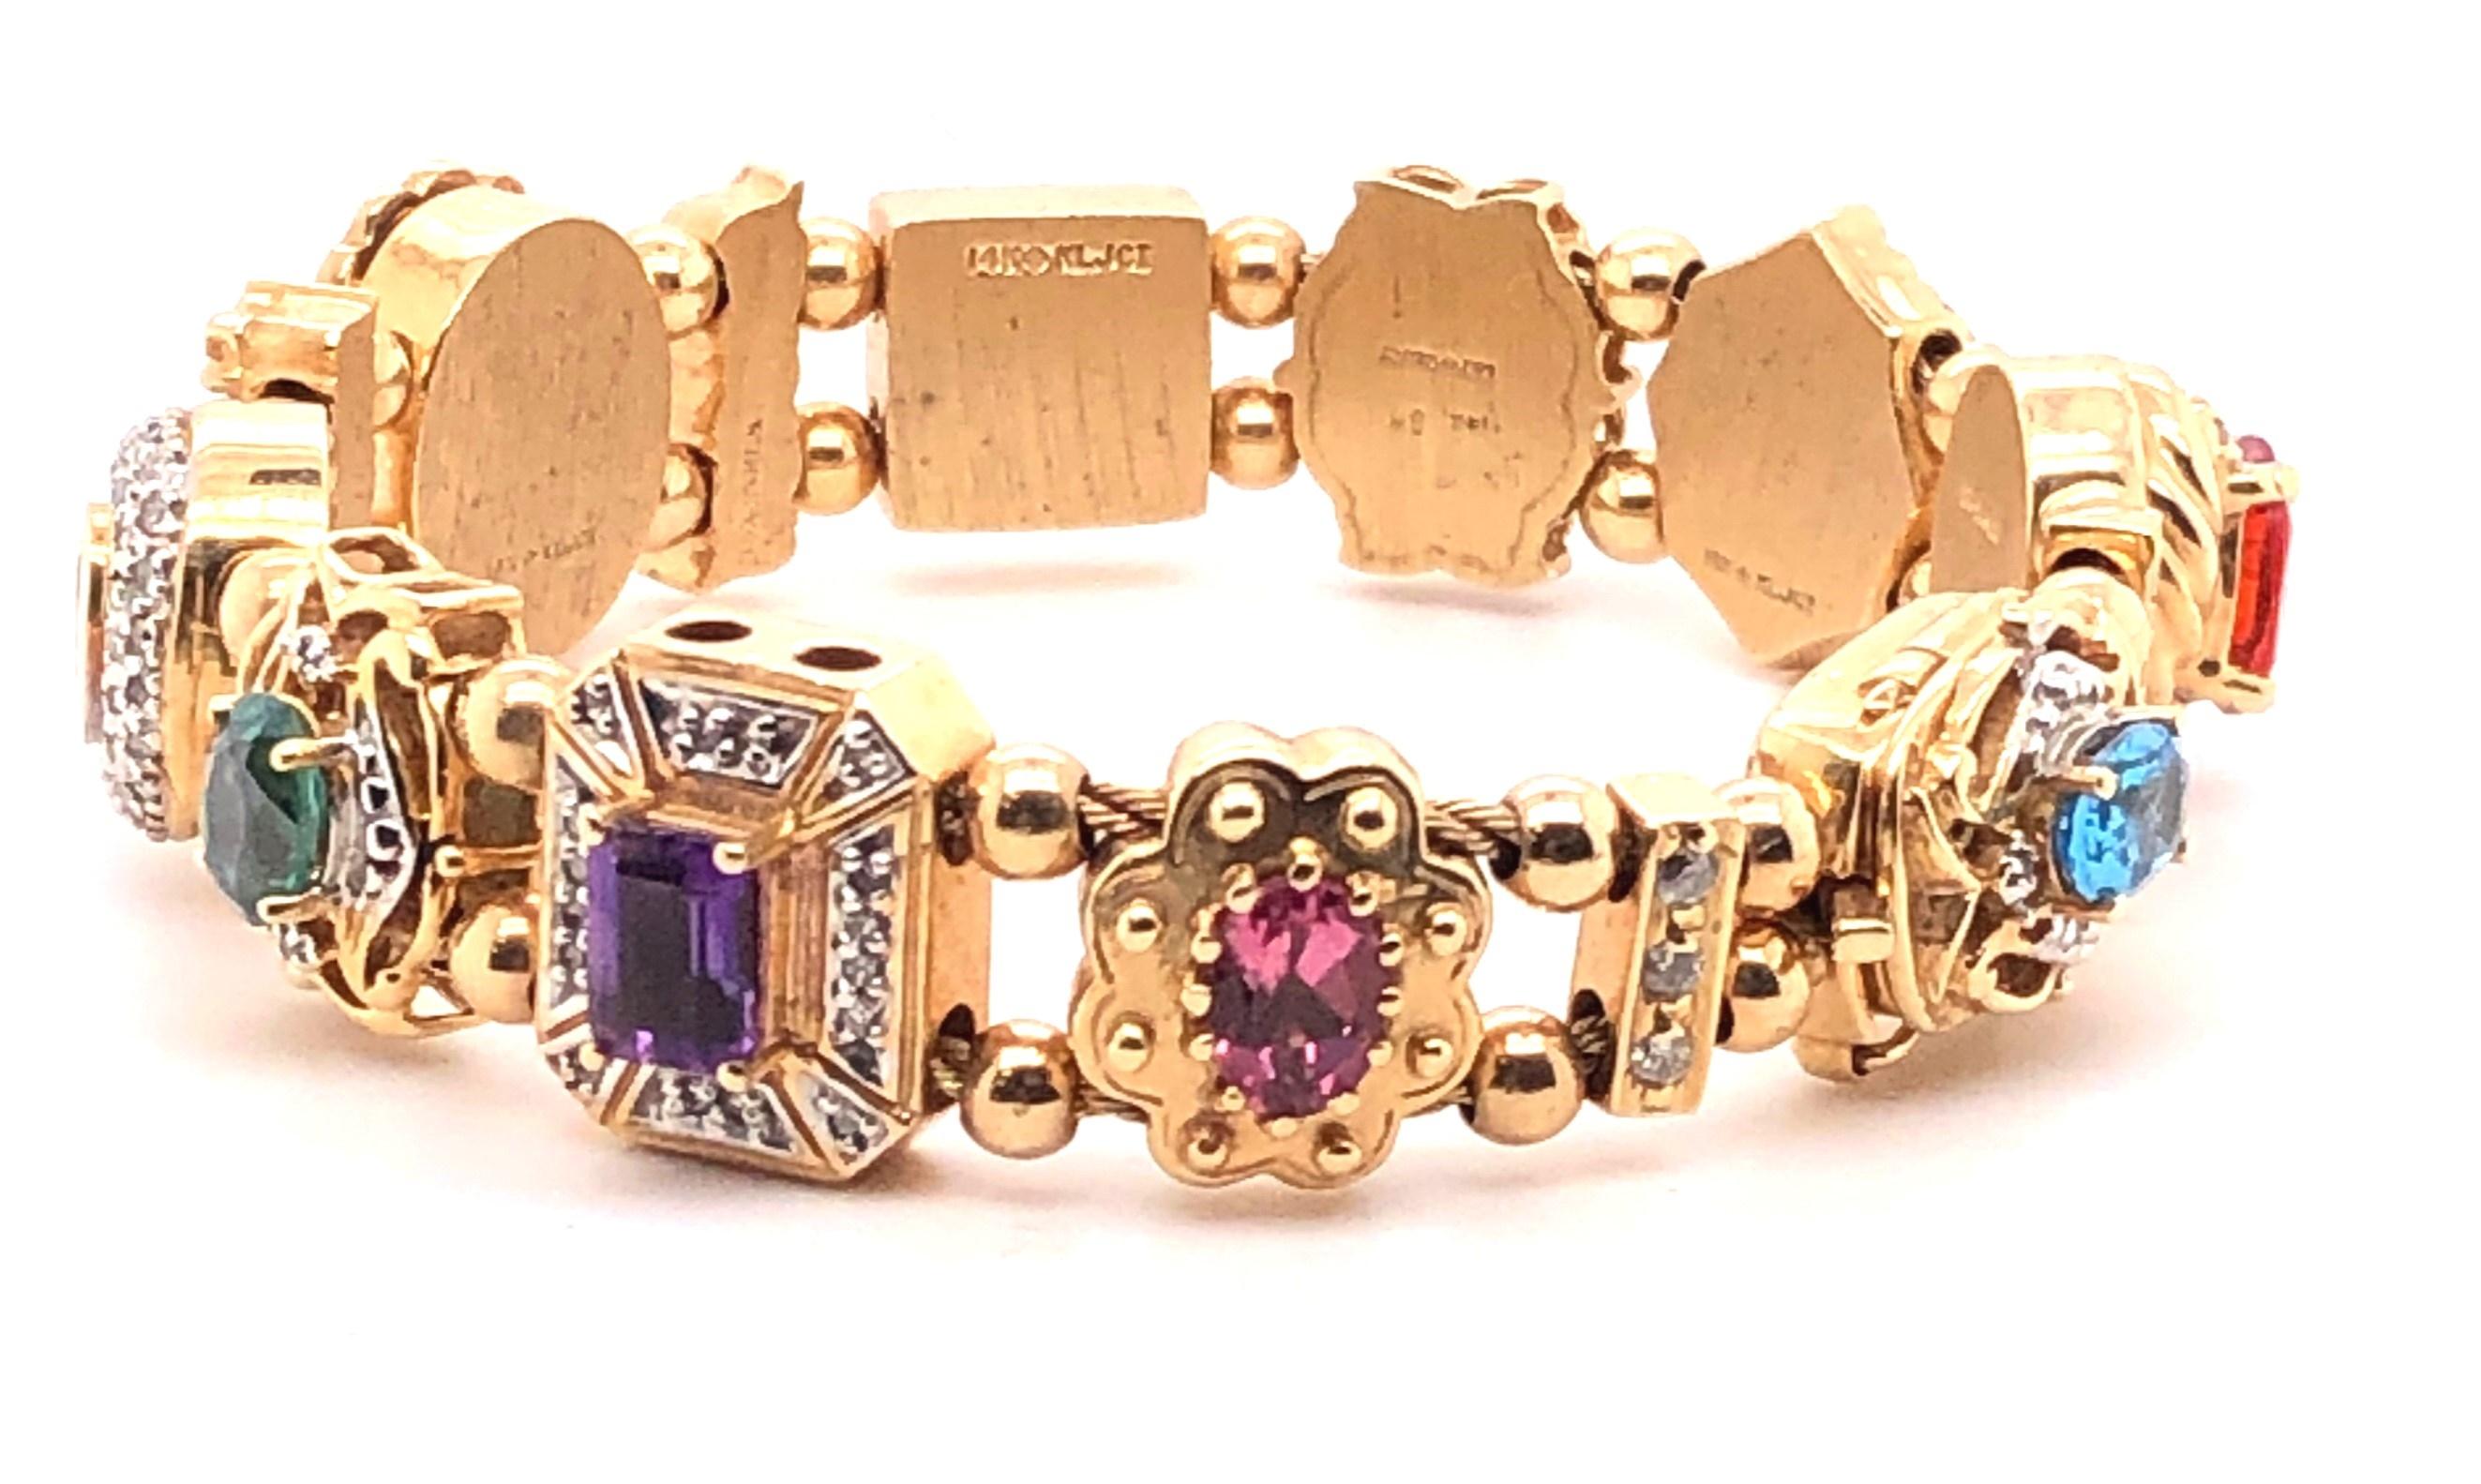 14kt yellow gold slide bracelet with approximately 1.11tcw H-I color/I1-I2 clarity diamonds.  The bracelet measures 8.50 inches long with a box clasp with a safety catch. The gemstones in the bracelet are:
.80ct Blue Topaz
1.02 Citrine
1.20 Mystic